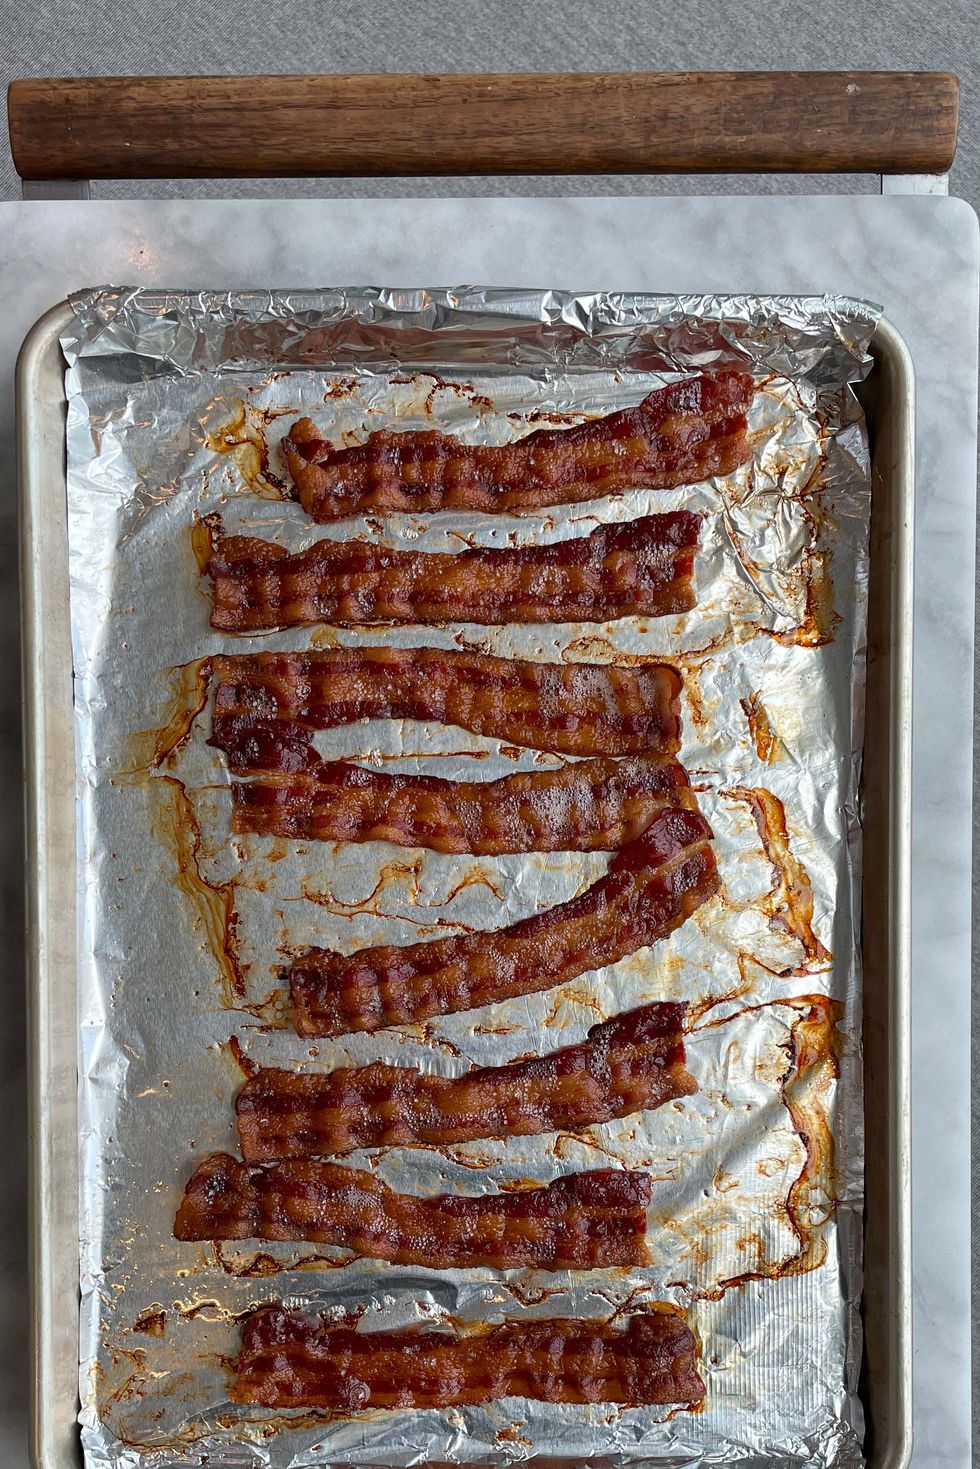 https://hips.hearstapps.com/hmg-prod/images/cooked-bacon-on-sheet-pan-jpg-64945cabe3709.jpg?crop=0.701xw:0.788xh;0.129xw,0.107xh&resize=980:*